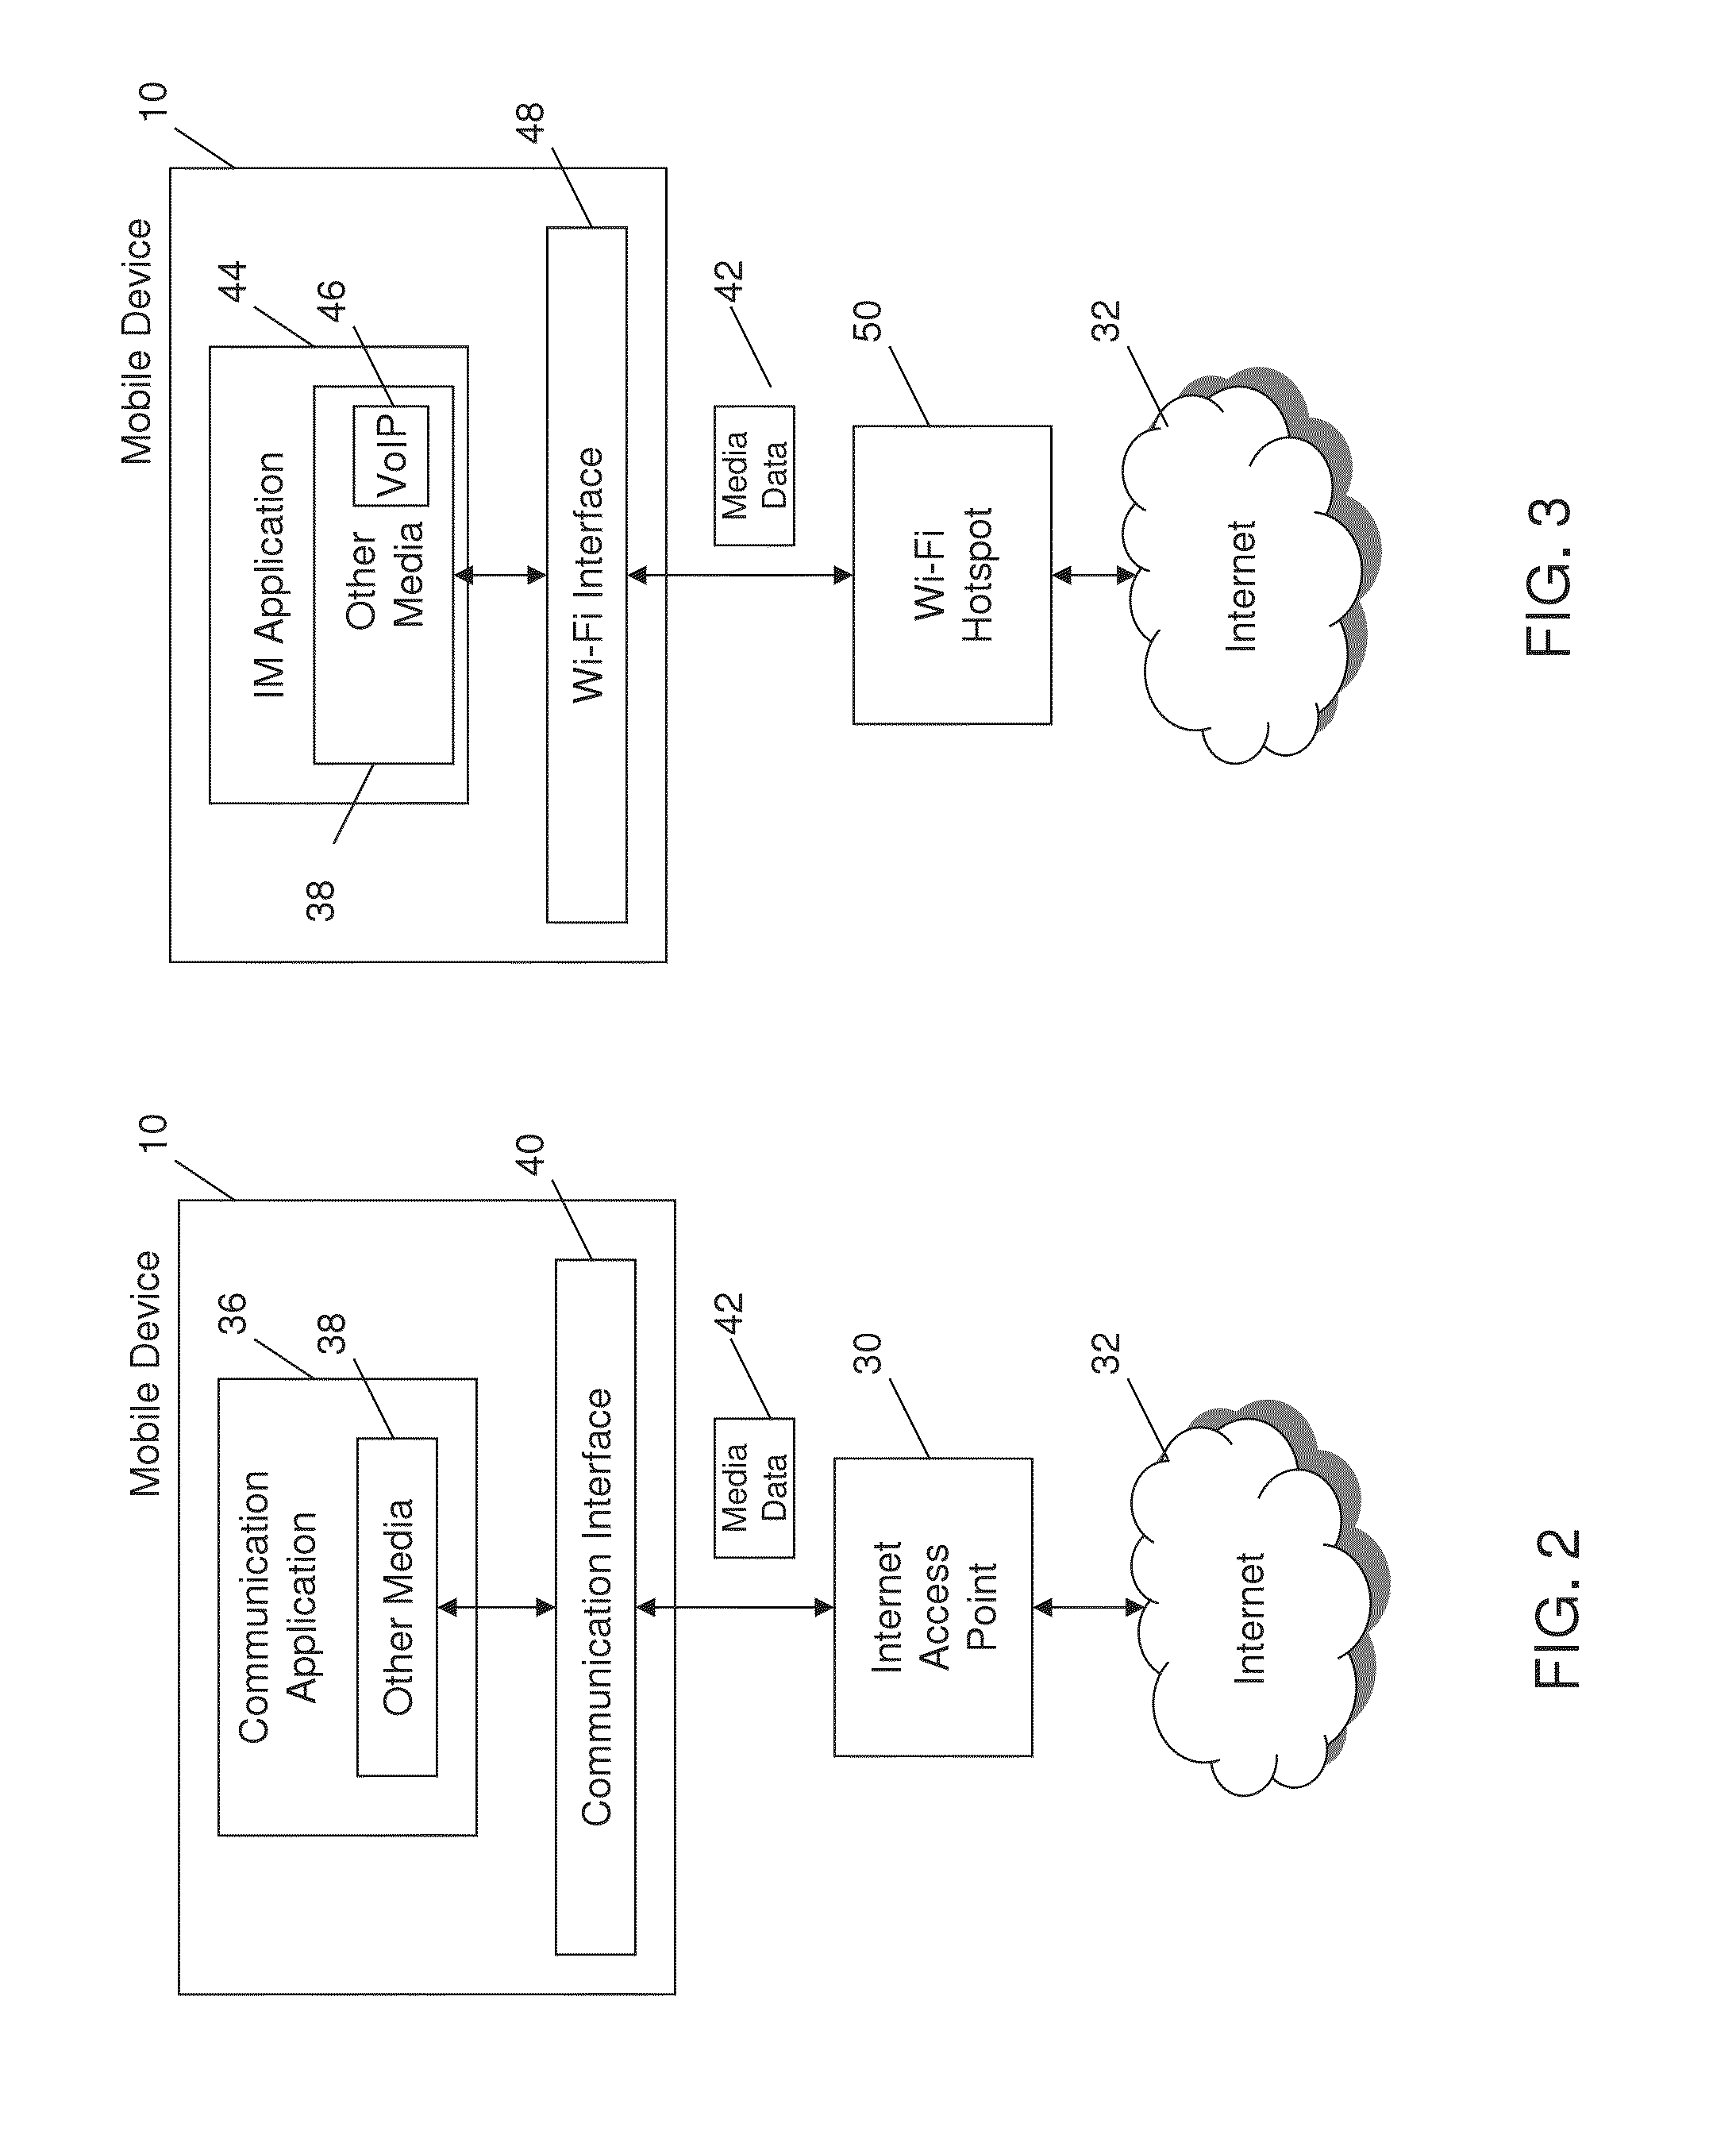 System and Method for Enabling Voice and Video Communications Using a Messaging Application